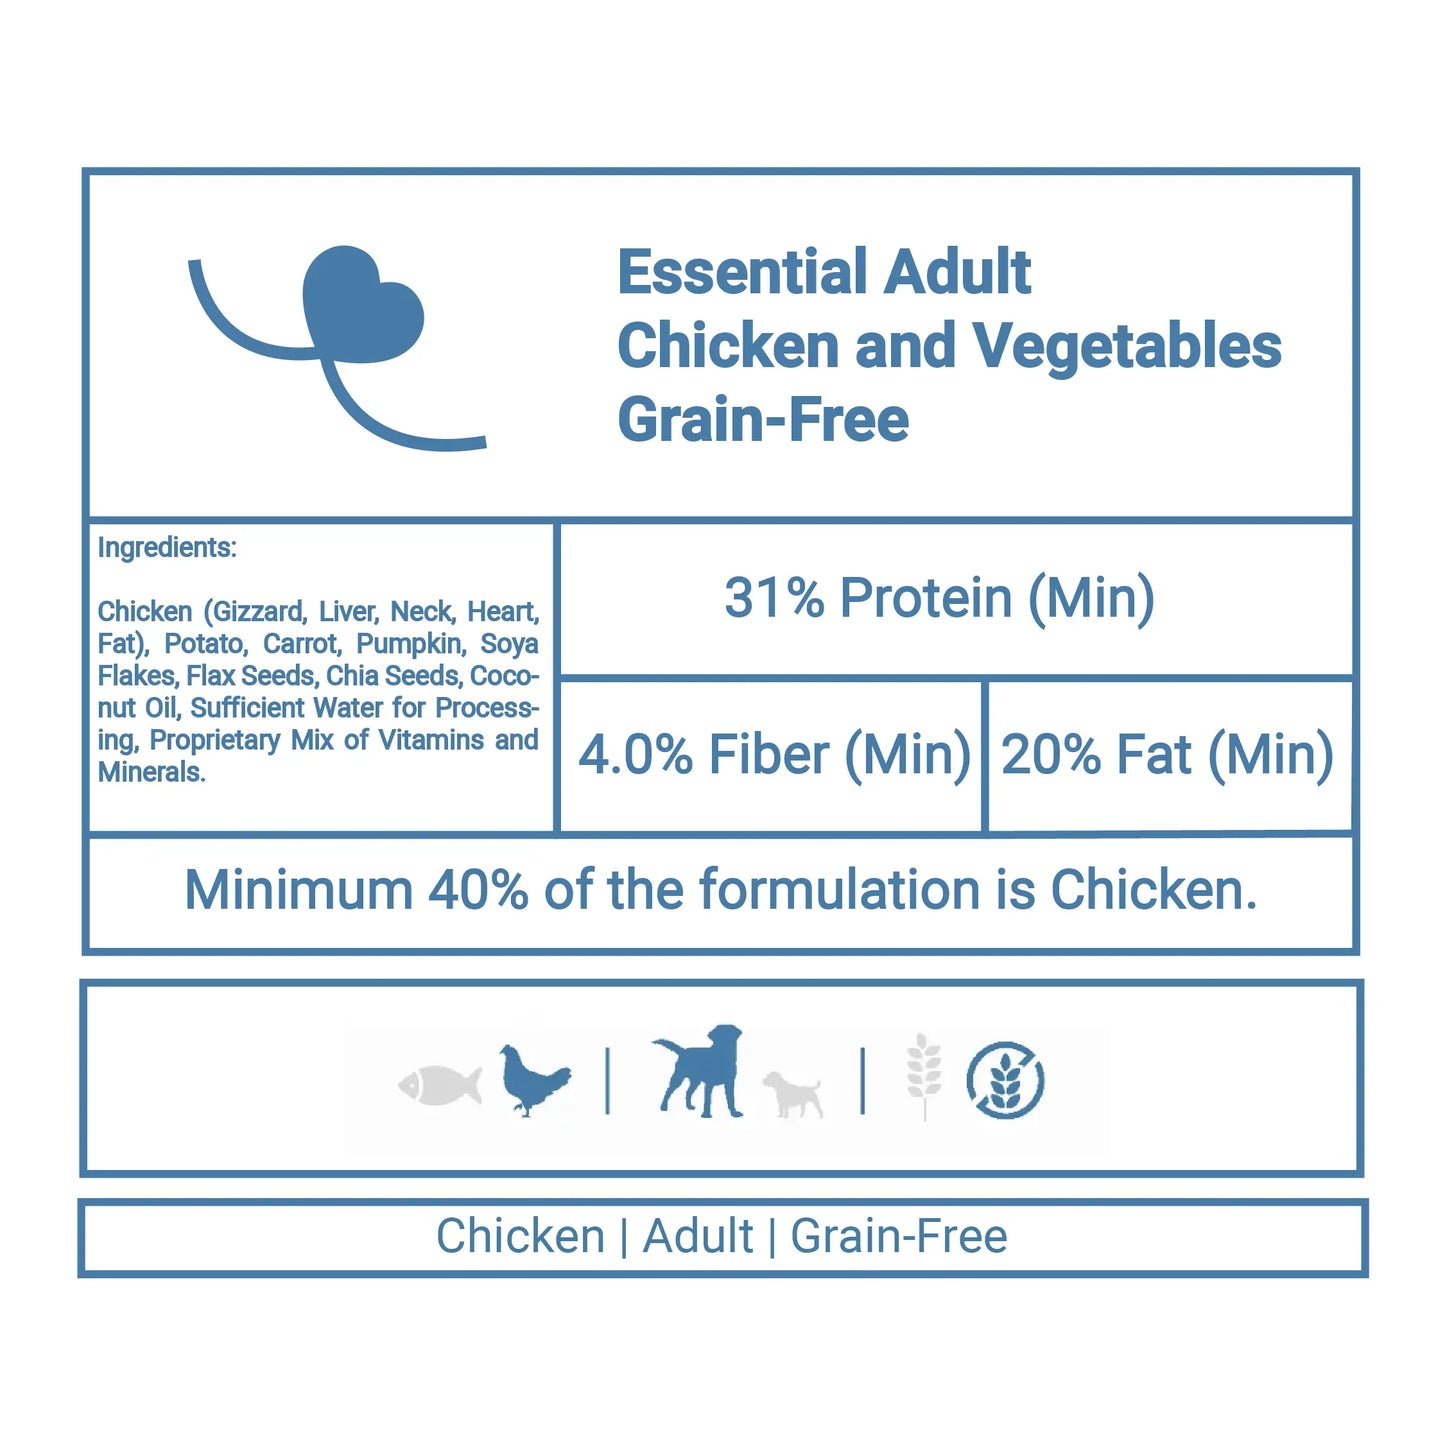 Essential Adult Chicken and Vegetables (Grain Free)